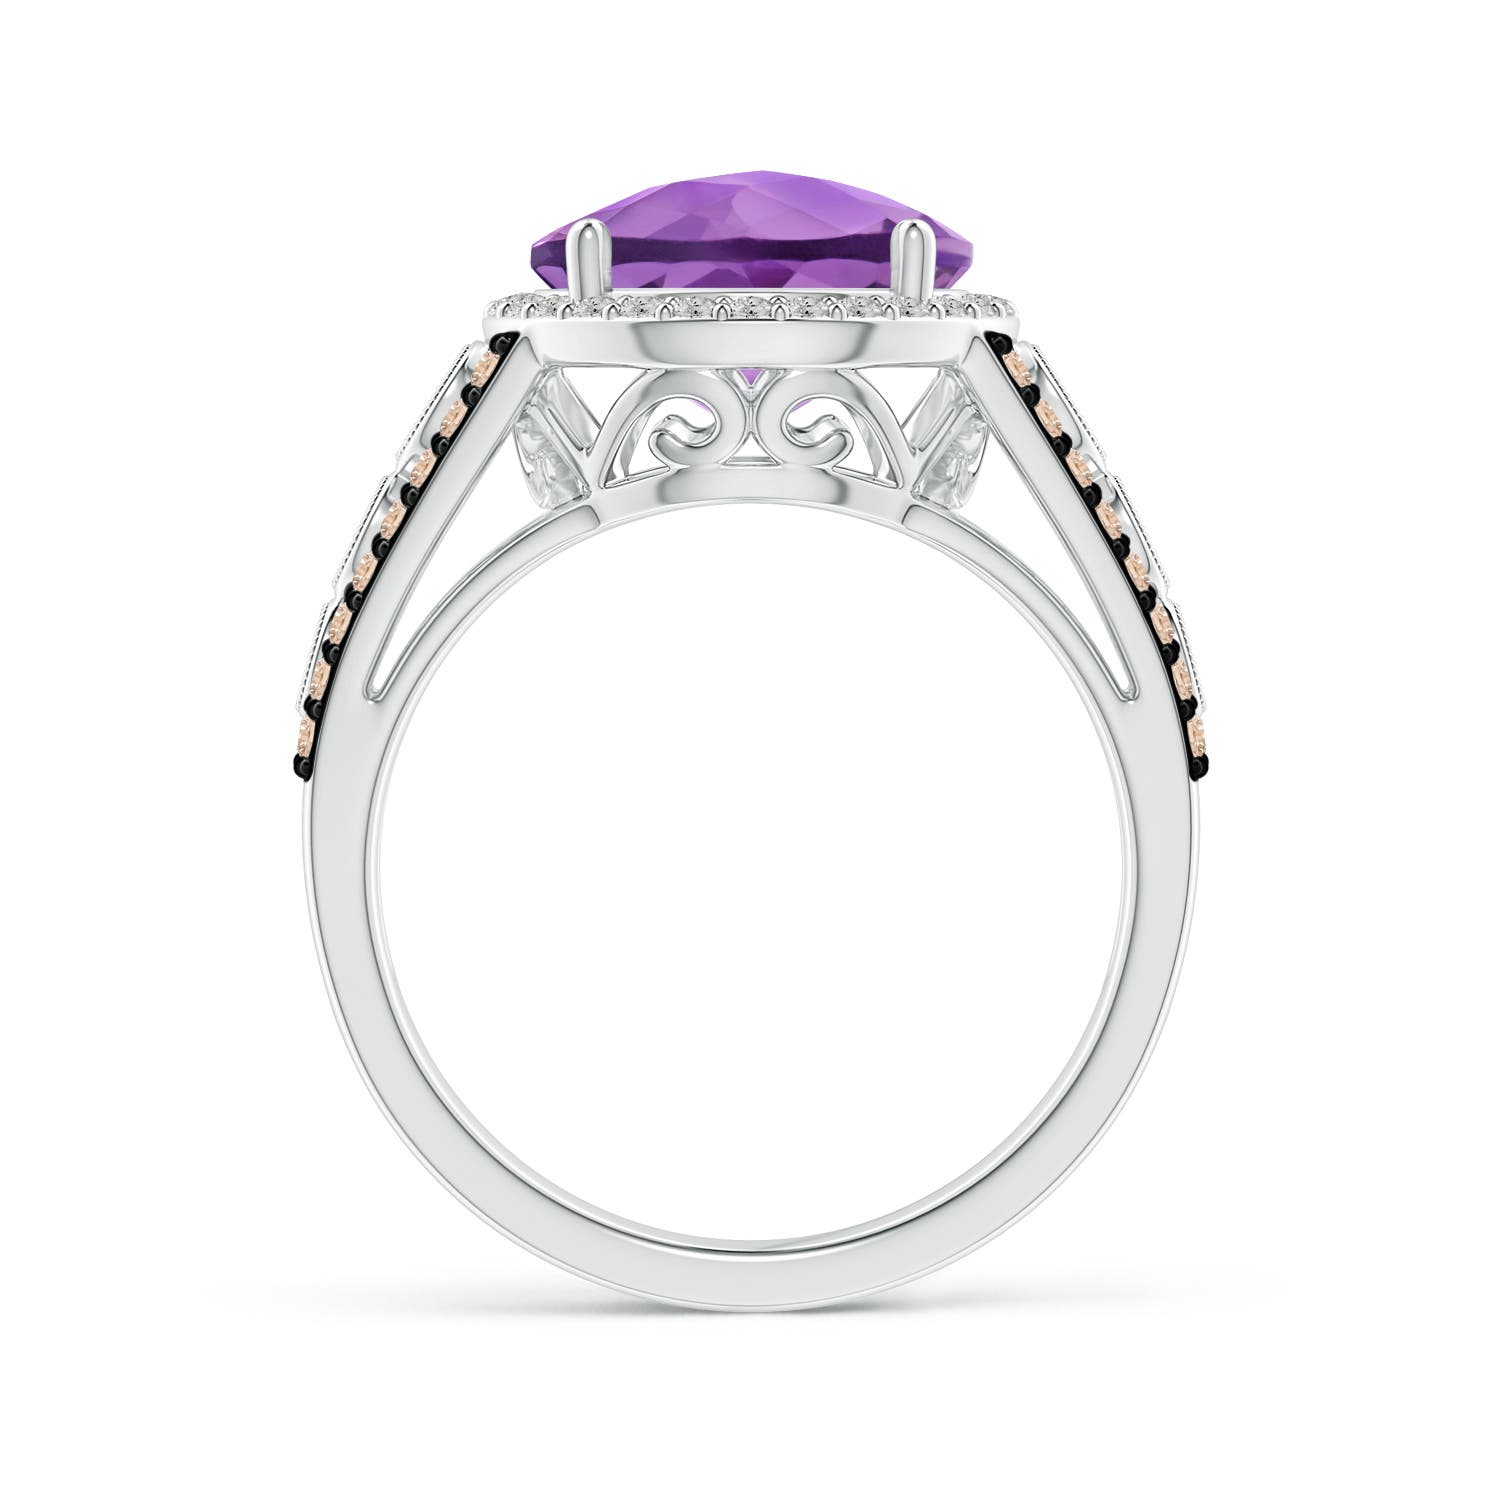 A - Amethyst / 4.42 CT / 14 KT White Gold